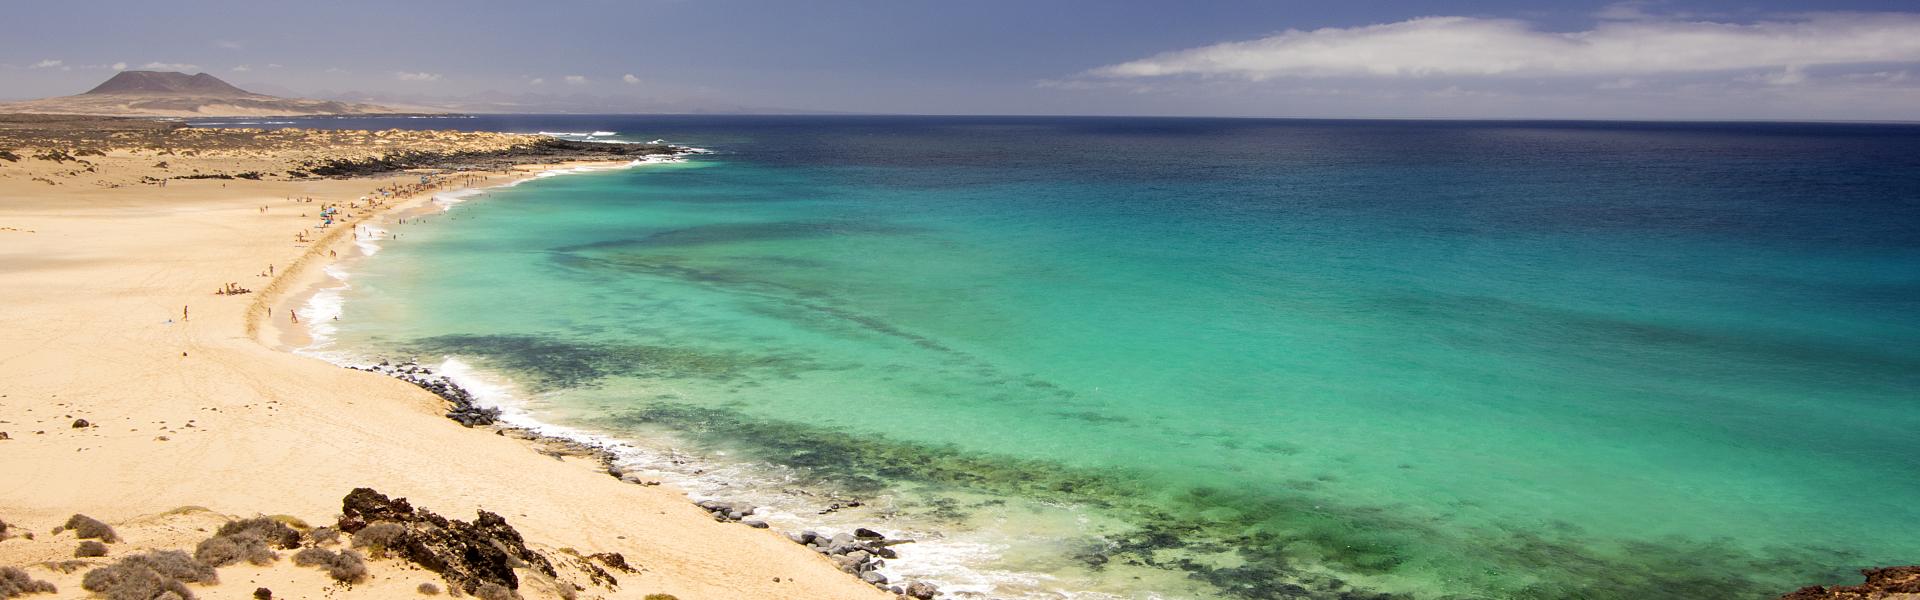 Golden sand, virgin land, turquoise waters and stunning views. Paradise does exist, it is in the Canary Islands, on the Island of La Graciosa and it is called Playa de las Conchas.